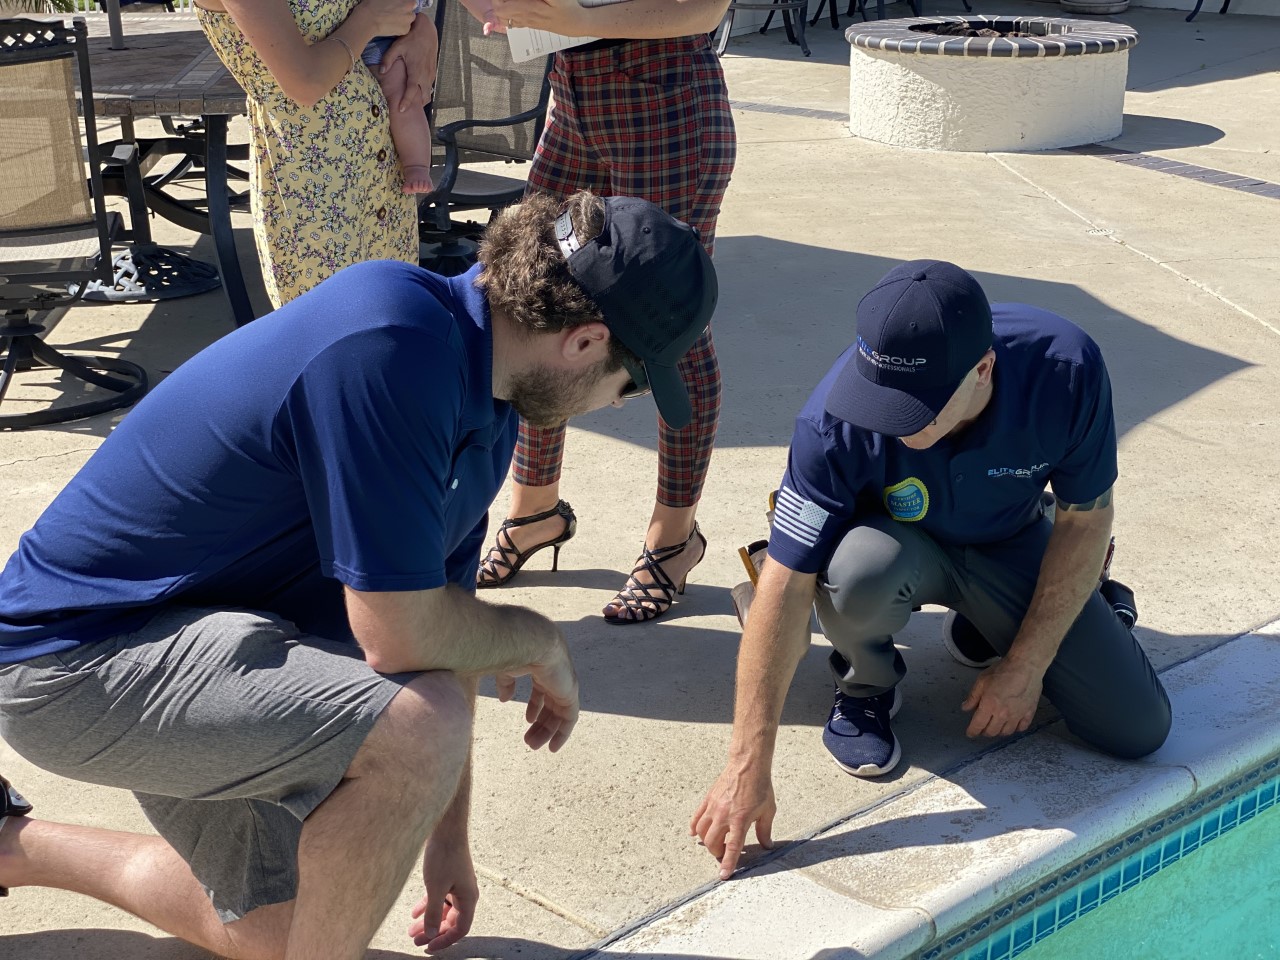 pool and spa inspection